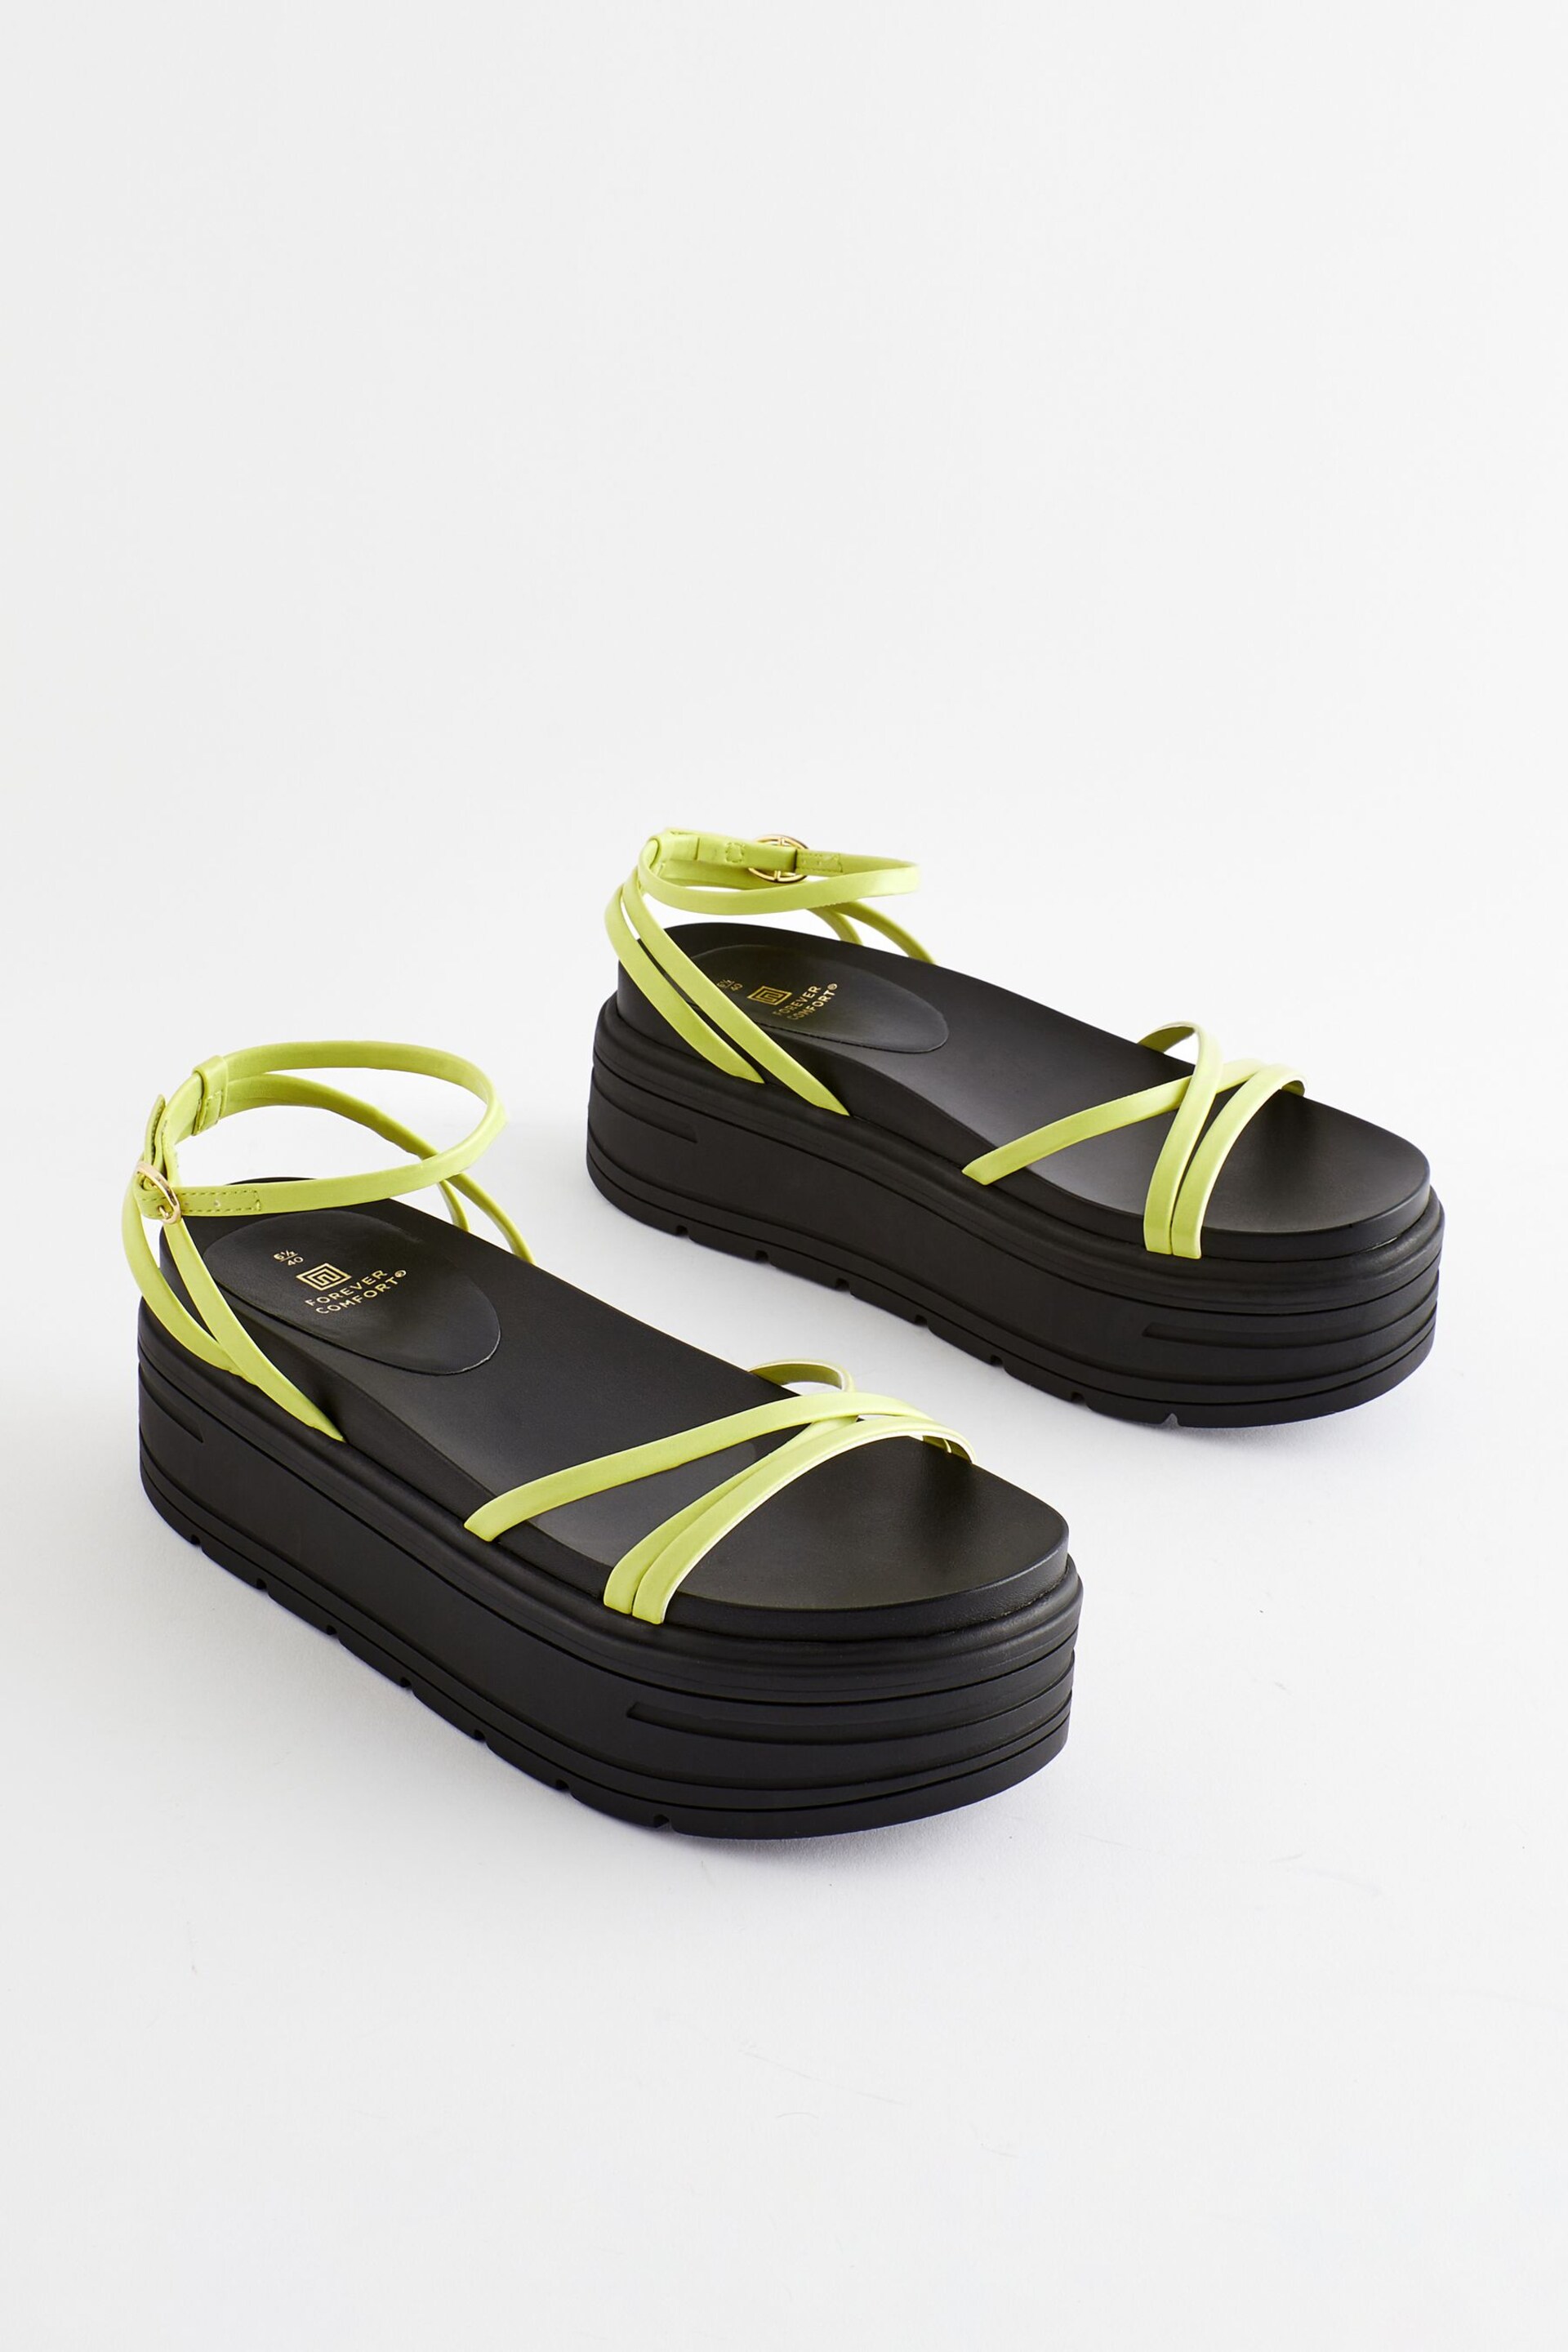 Lime Green Regular/Wide Fit Chunky Strappy Flatform Sandals - Image 5 of 11